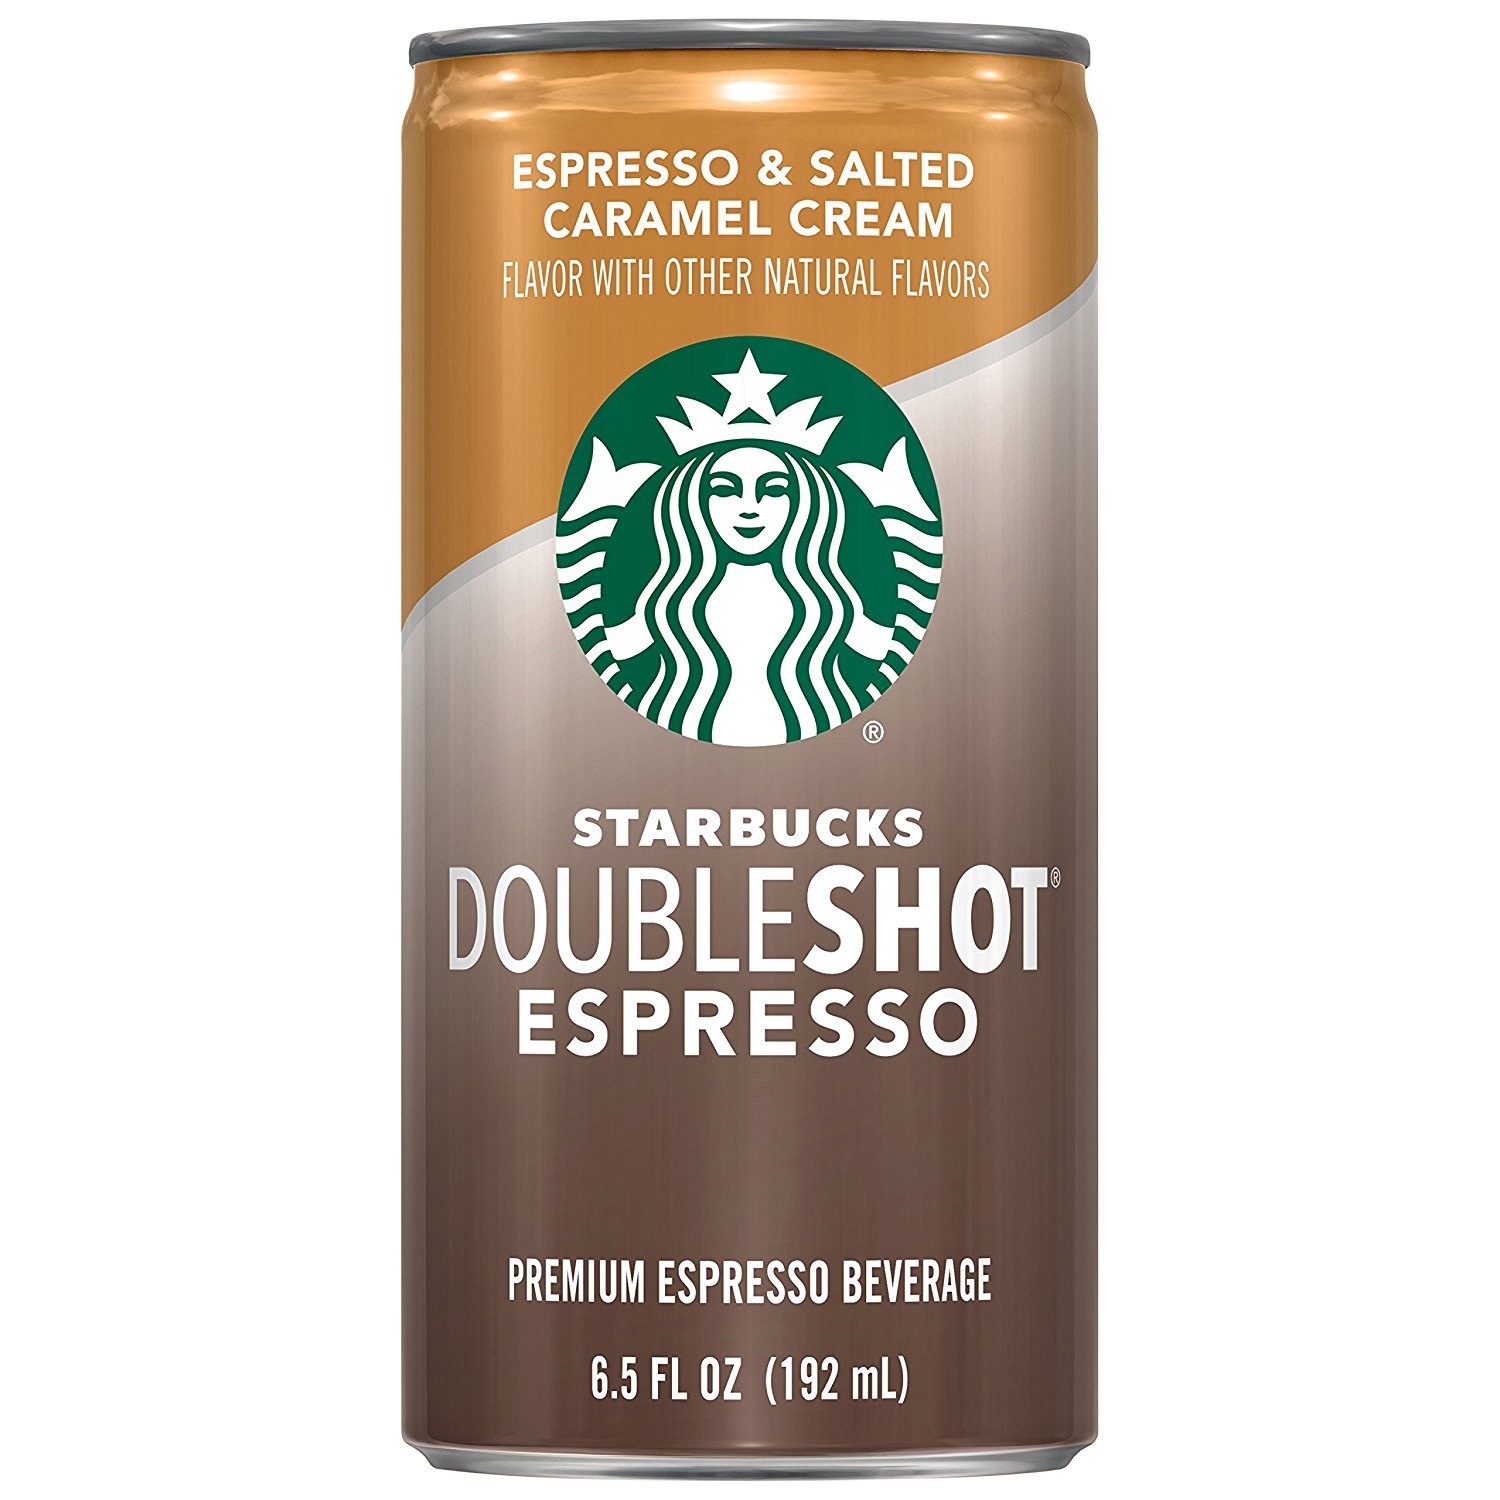 Starbucks Doubleshot Espresso, Salted Caramel, 6.5 fl oz. cans (12 Pack) $12.60 after 25% S&S coupon + 5% S&S